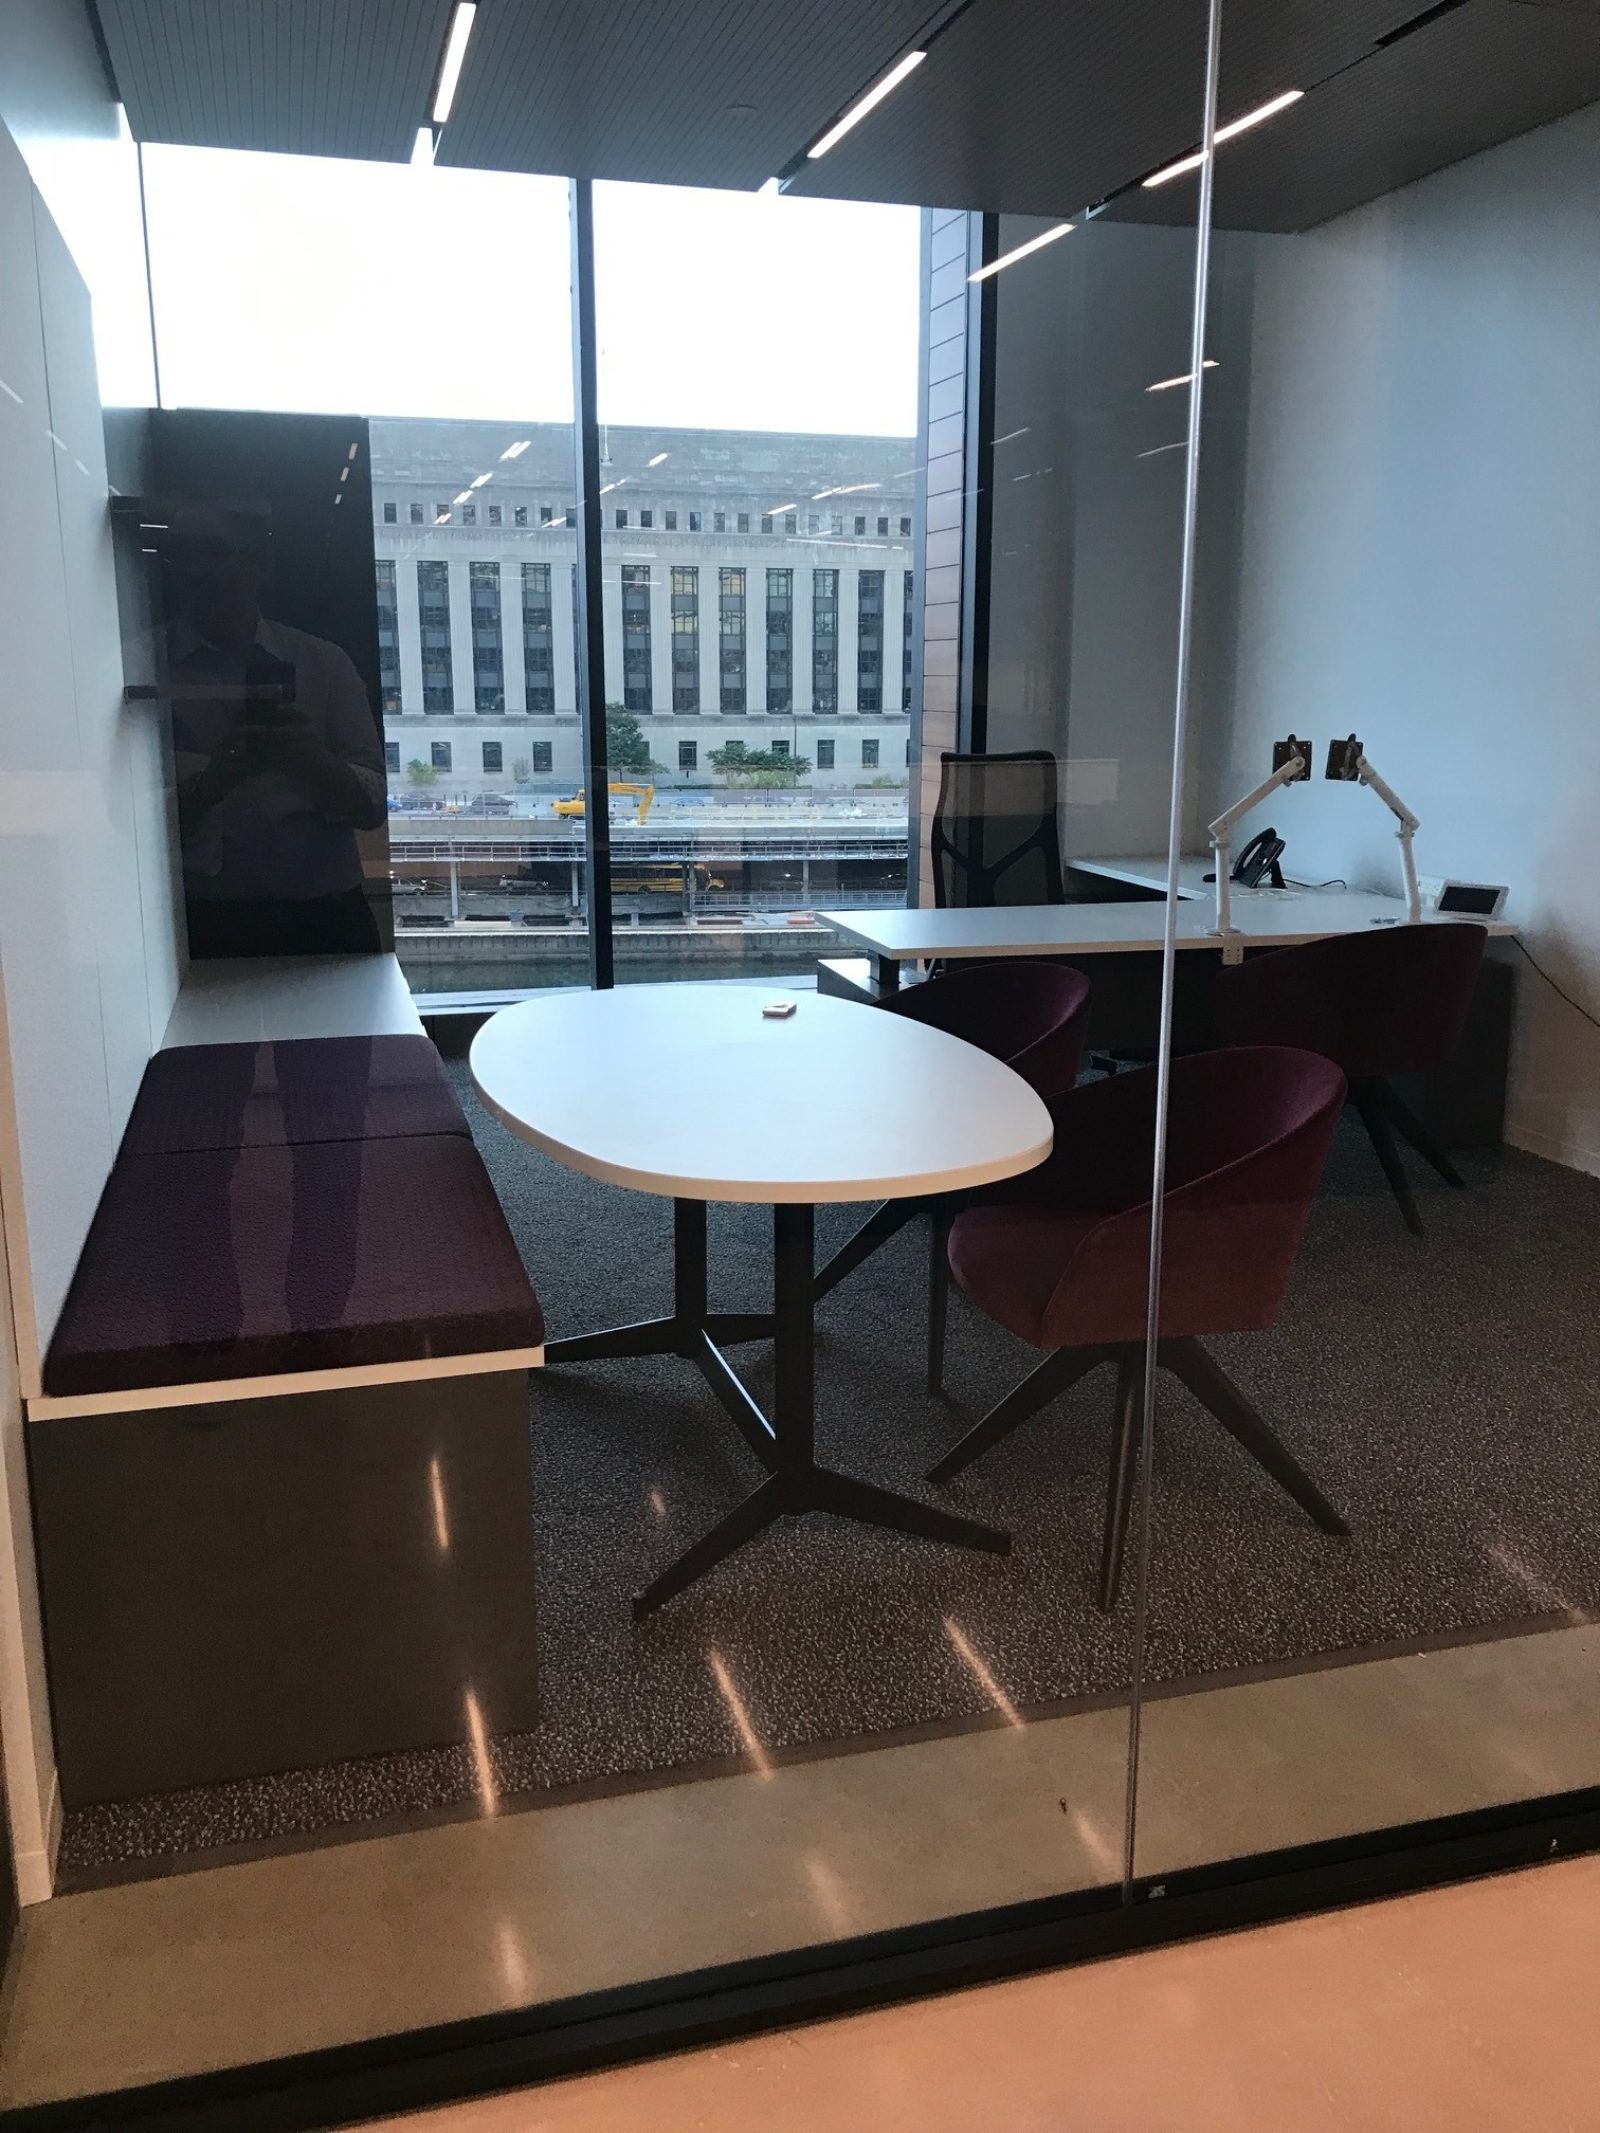 Private office with an L-shape desk on the right, an oval table on the left with bench seating.